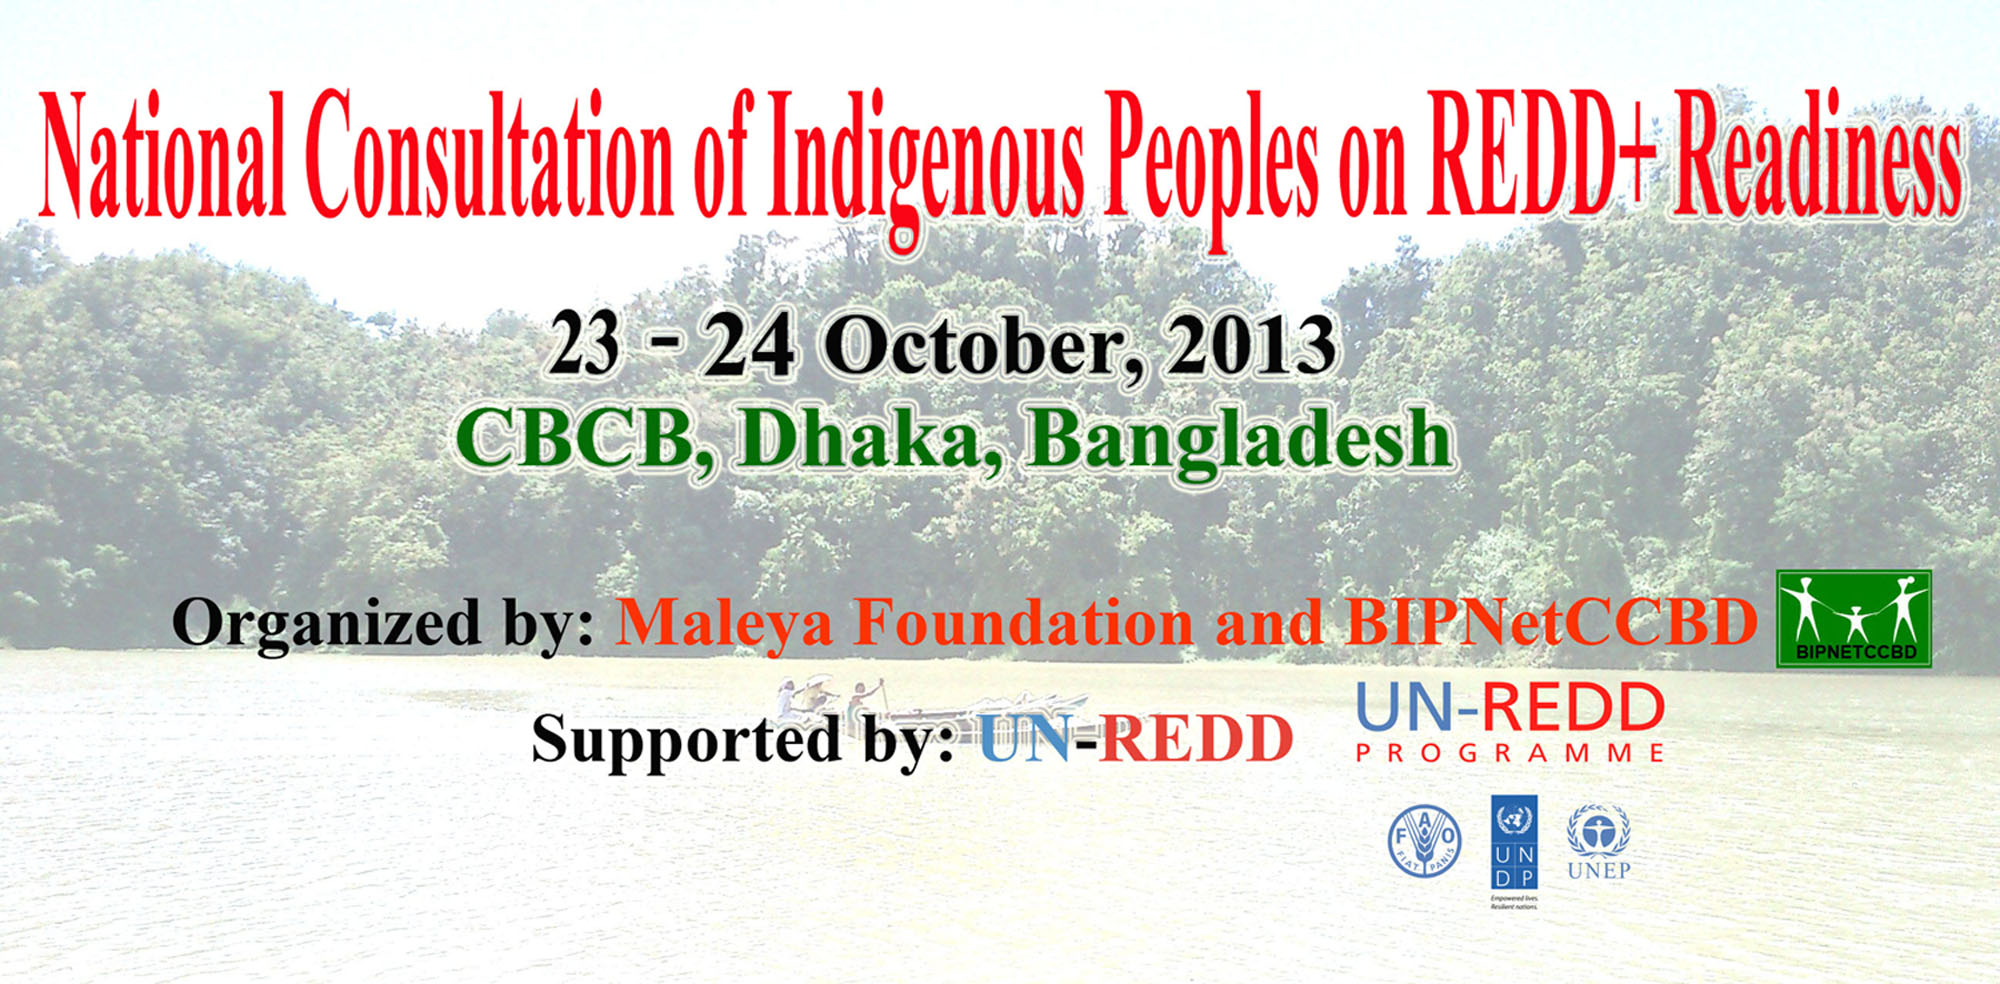 National Consultation of Indigenous Peoples on UNREDD+ Readiness Programme was held at Dhaka, Bangladesh